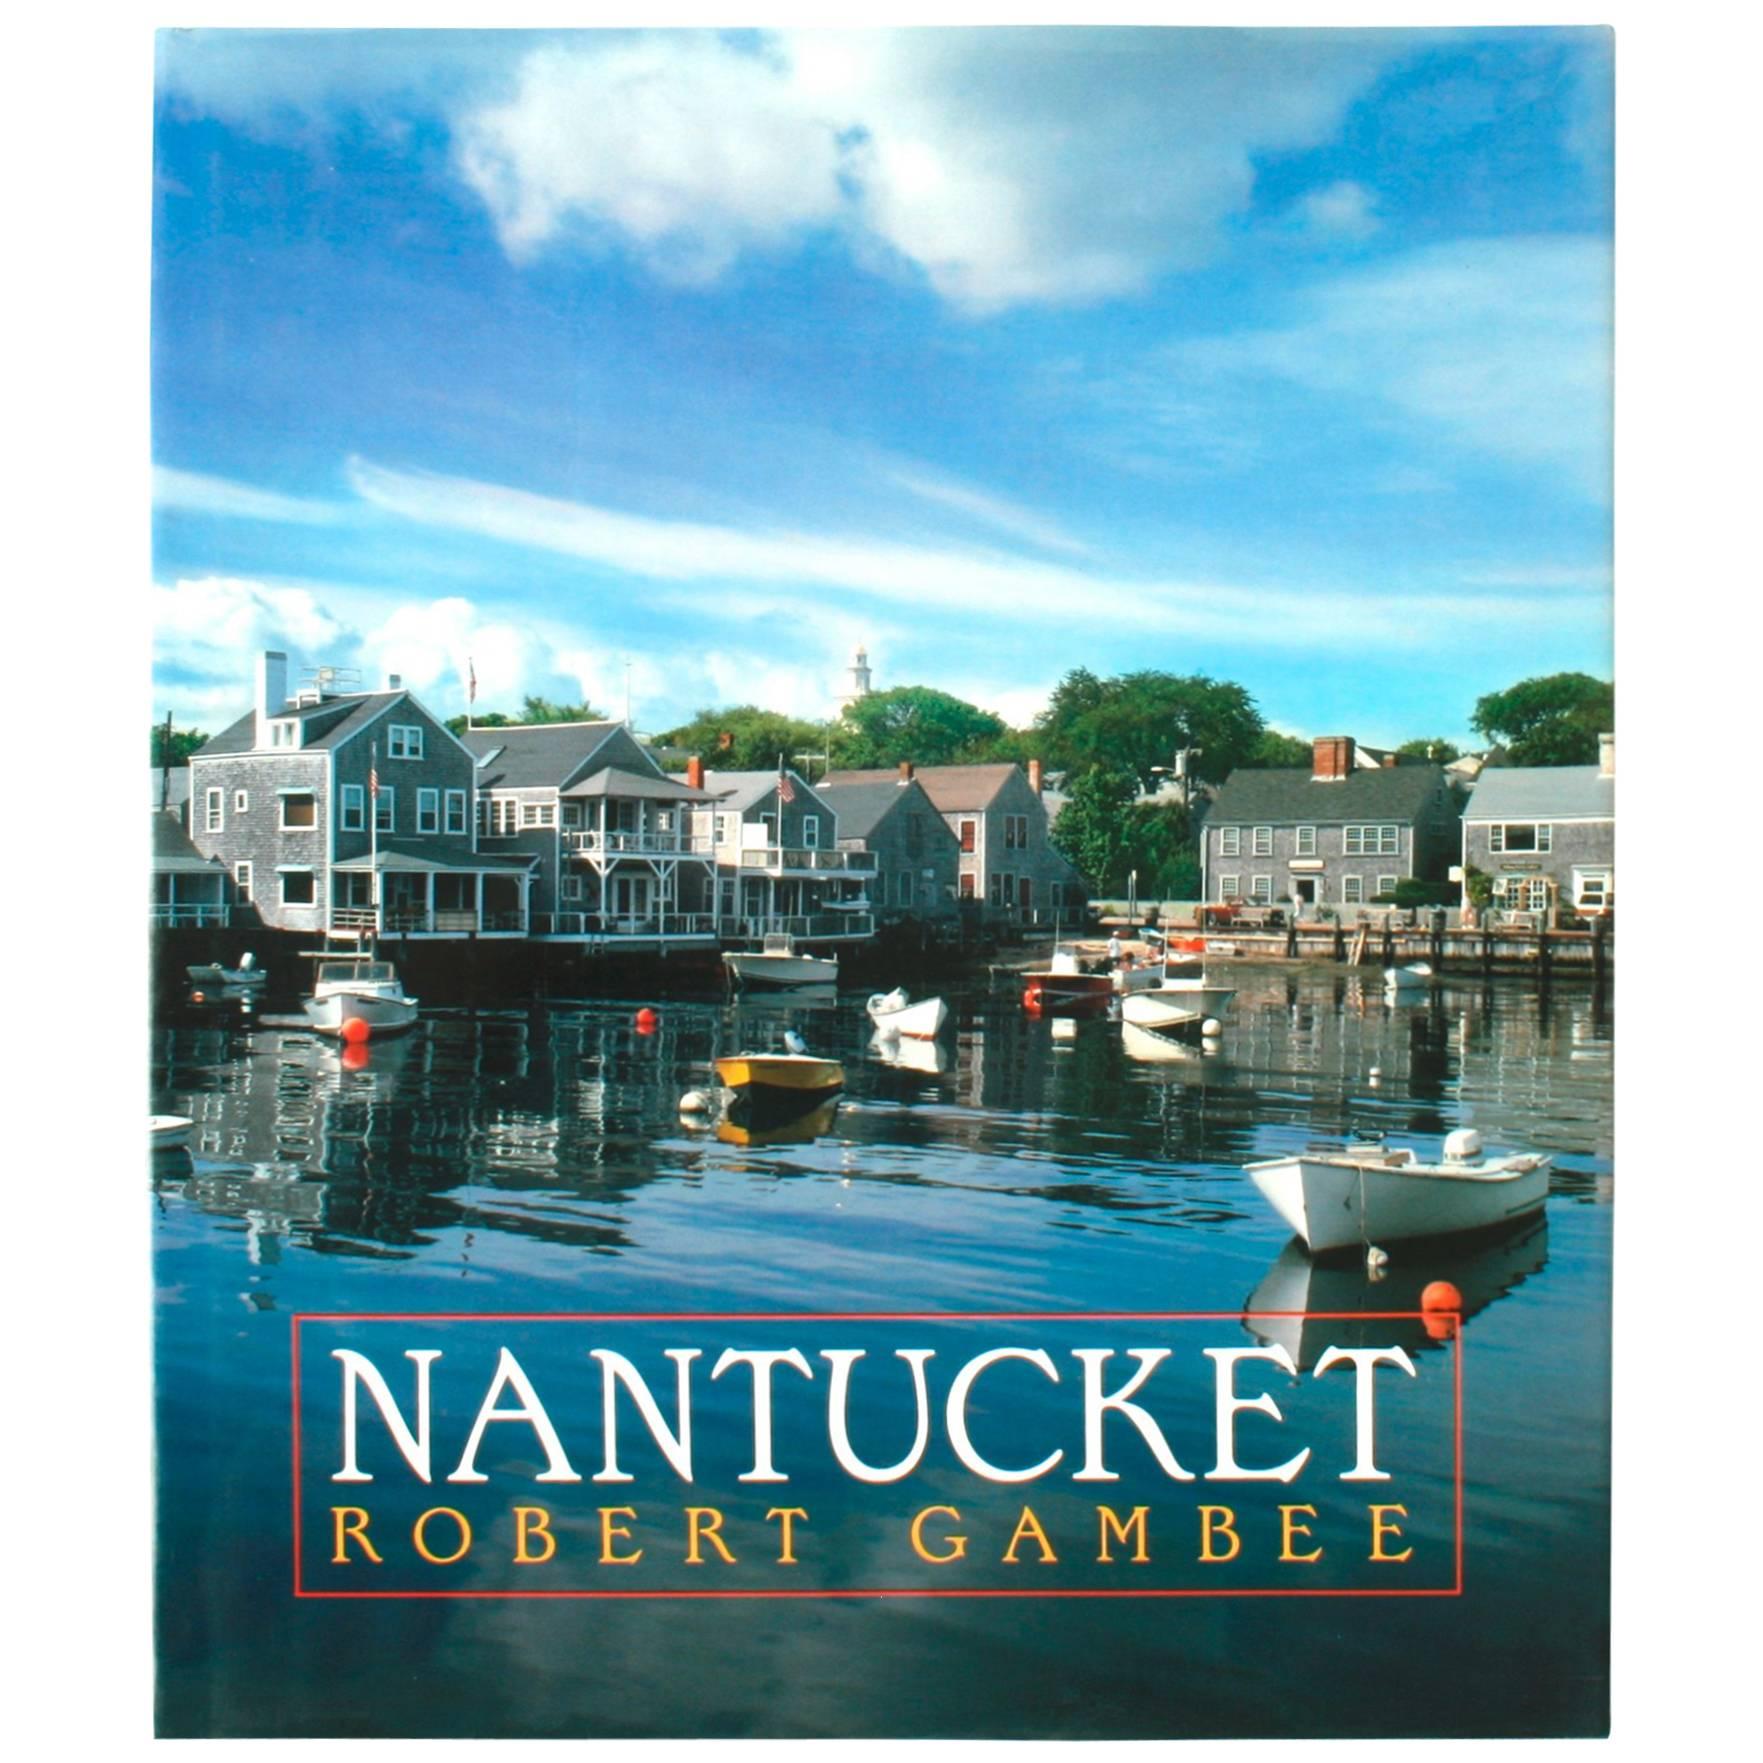 Nantucket by Robert Gambee, Signed First Edition